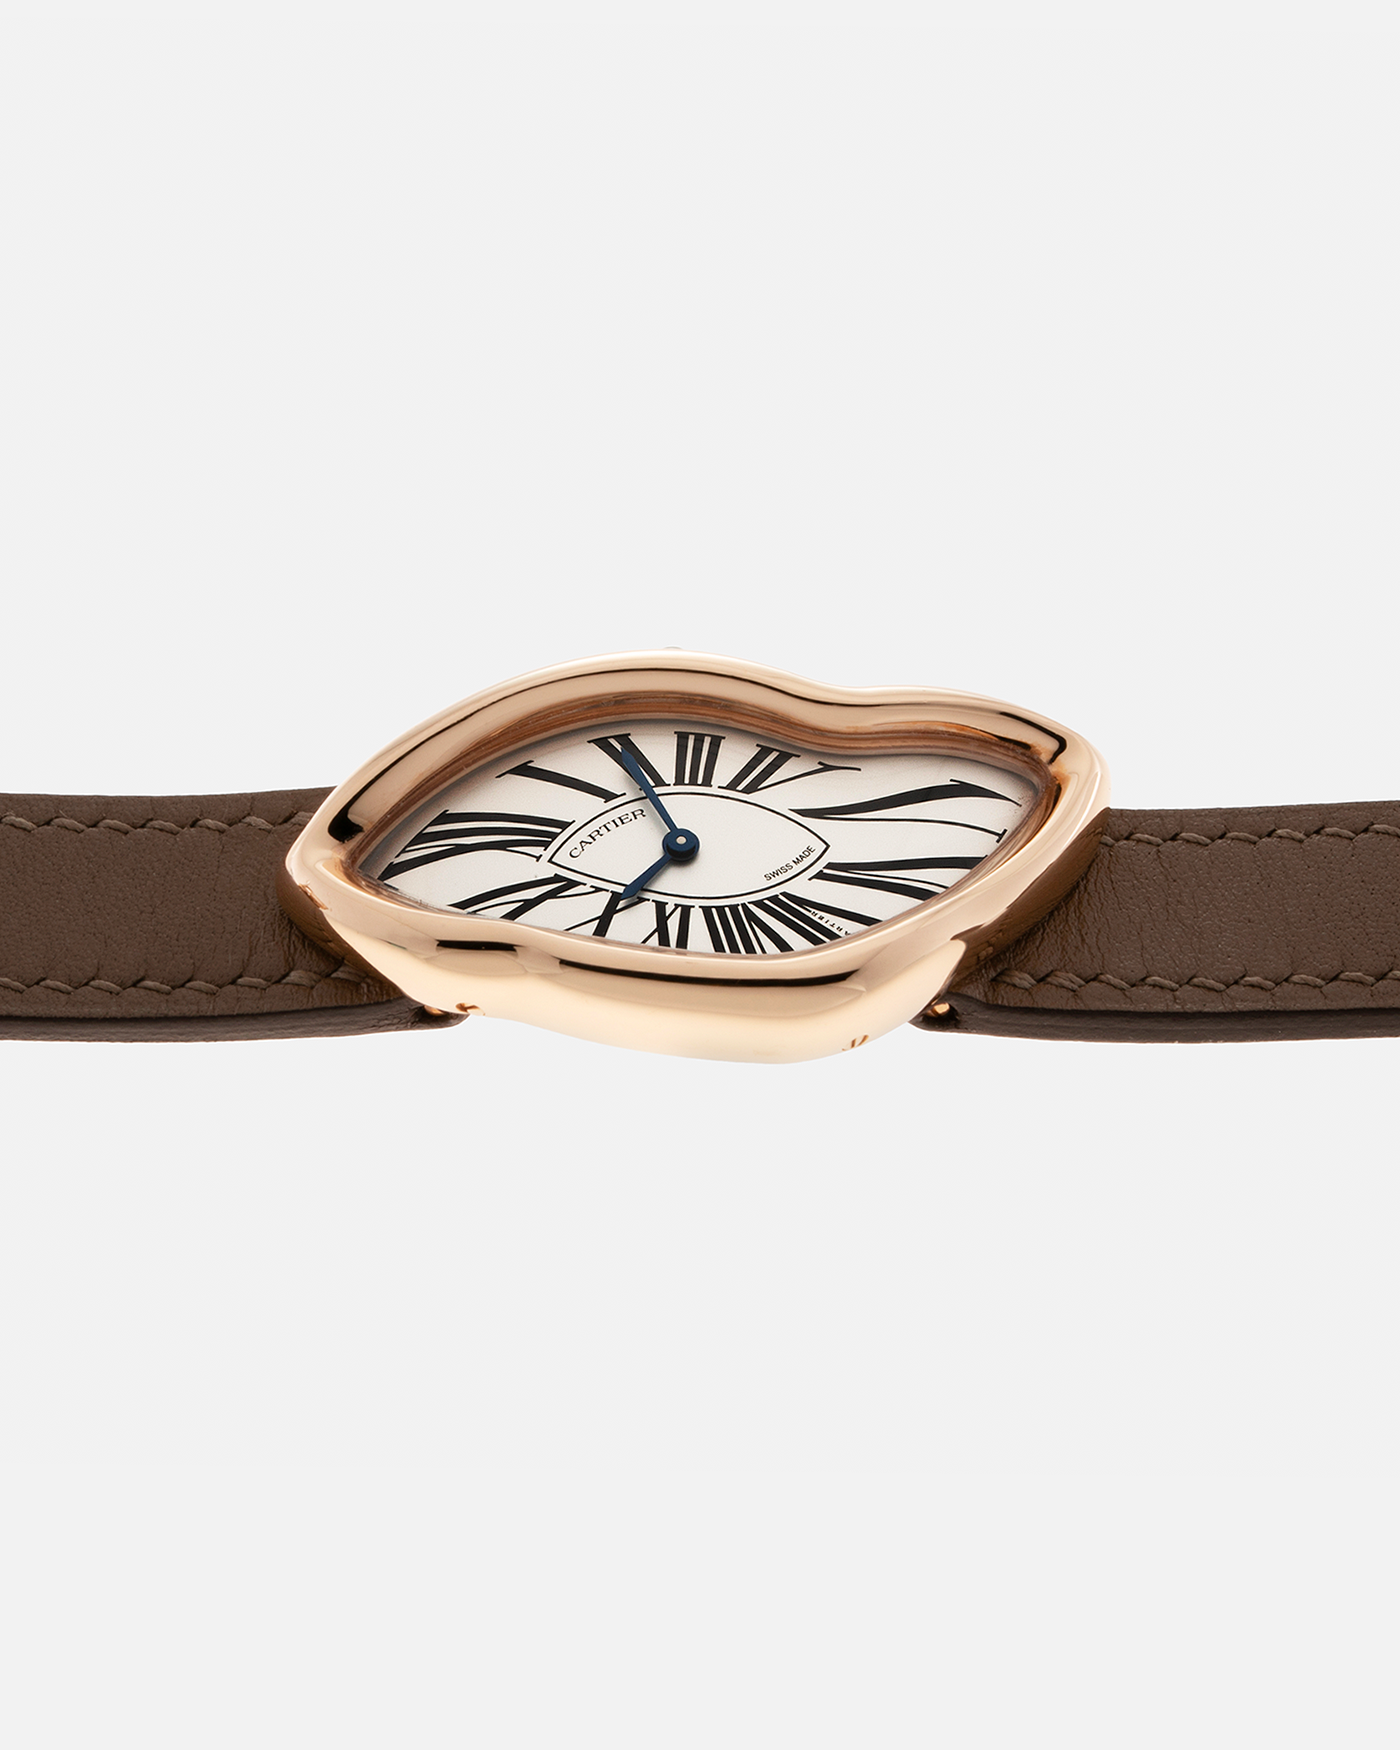 Brand: Cartier Year: 2023 Model: Crash Reference Number: WGCH0031, New Special Order Material: 18-carat Rose Gold Movement: Cartier Cal. 1917 MC, Manual-Winding Case Diameter: 42mm x 24mm (Asymmetrical Case) Strap: Cartier Tanned Leather Strap with Signed 18-carat Rose Gold Deployant Clasp, additional Woohoo Time Taupe Leather Strap